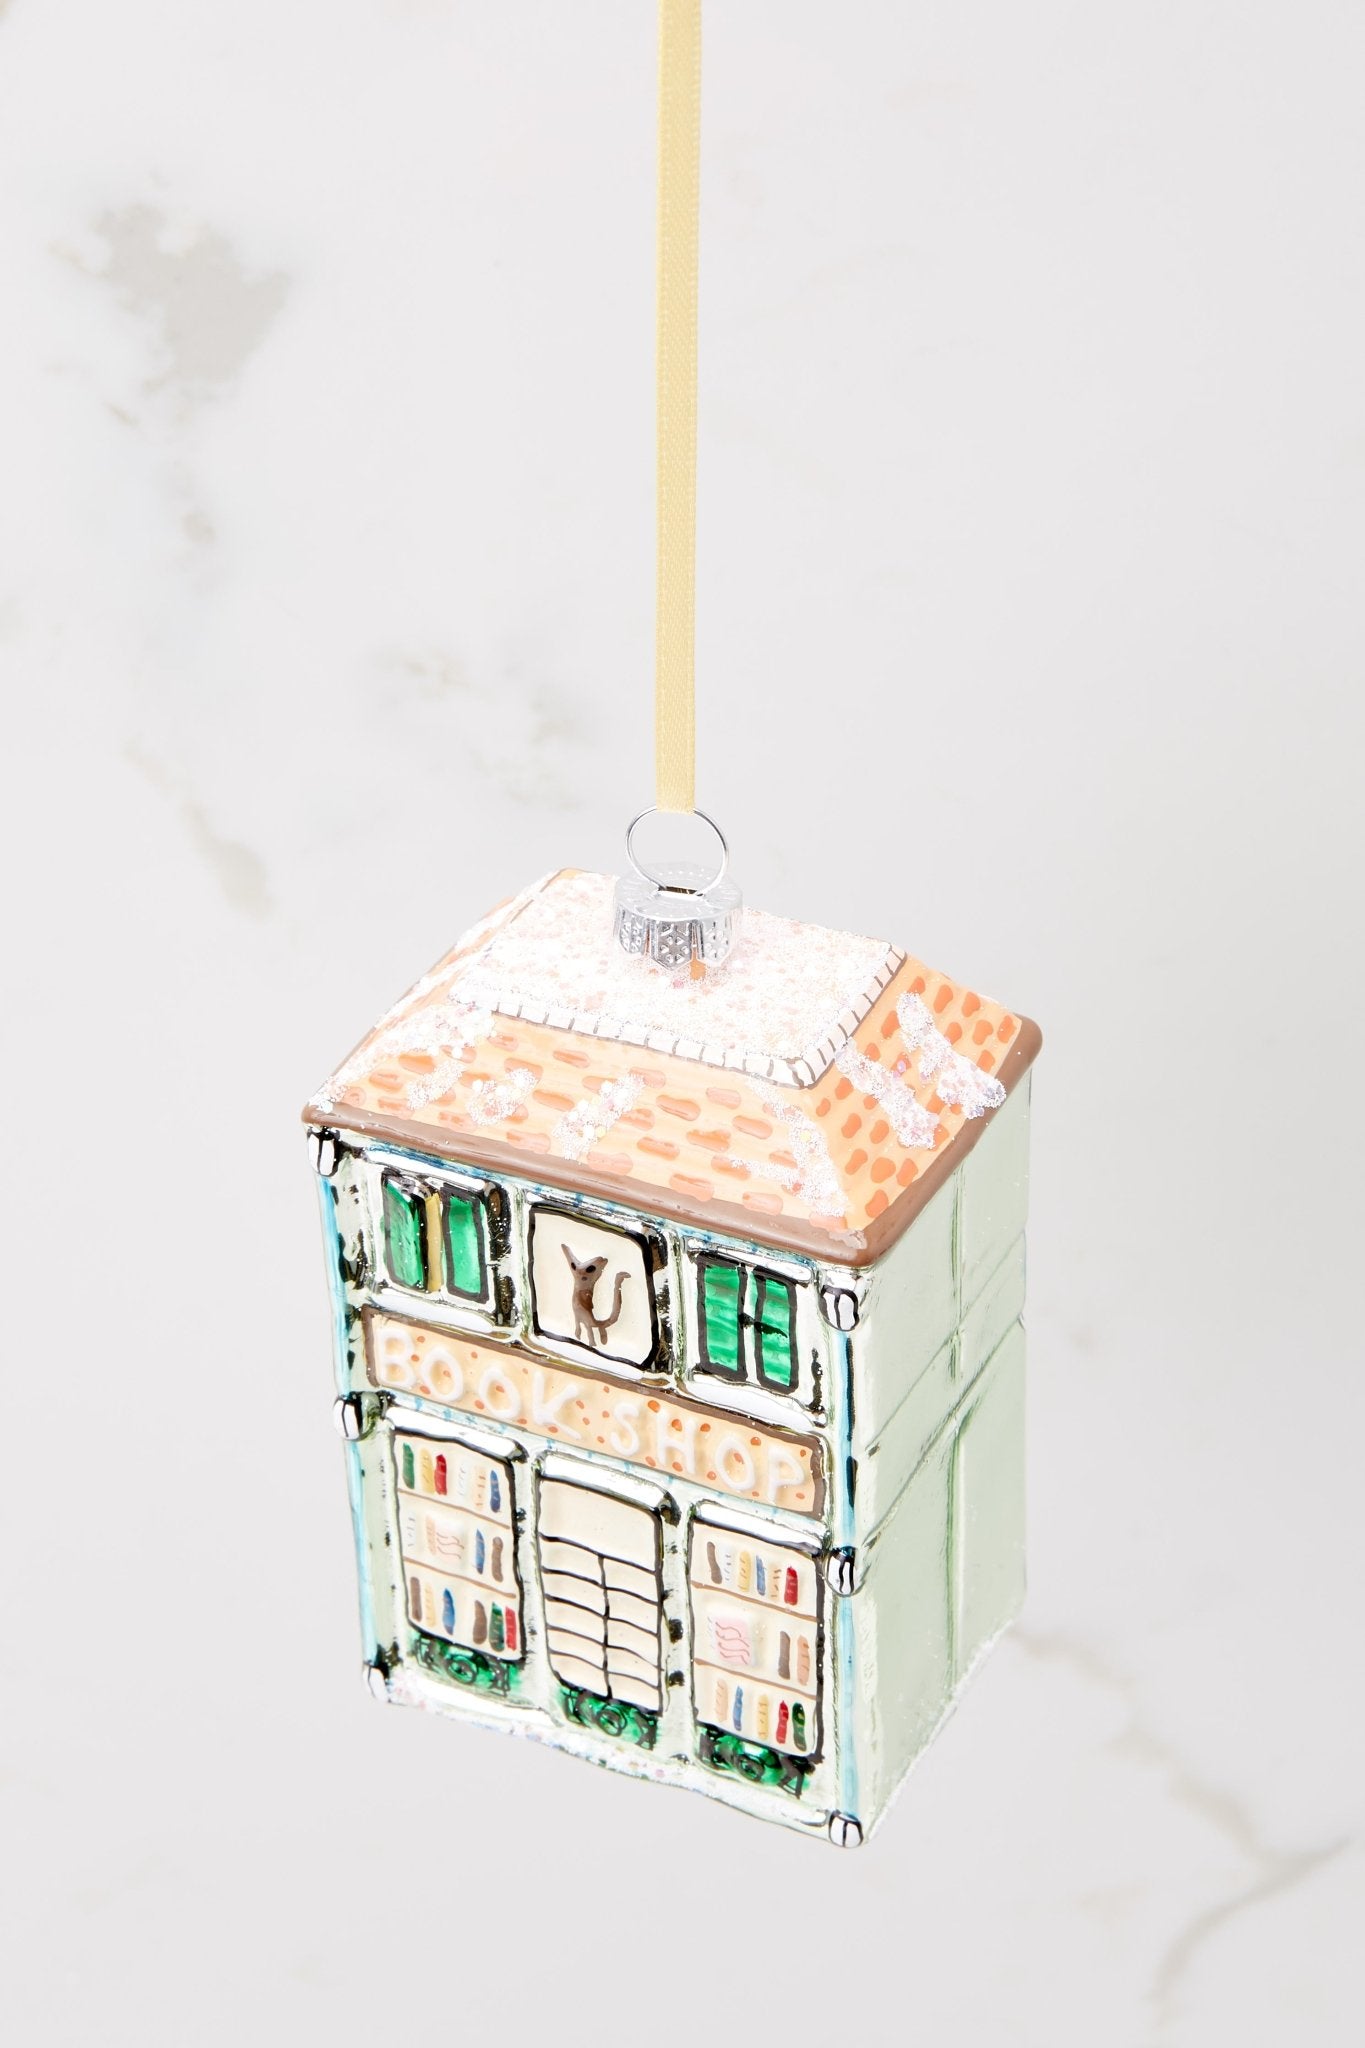 Top view of this ornament that features a building shape that says "BOOK SHOP" and has a cat in one of the windows.